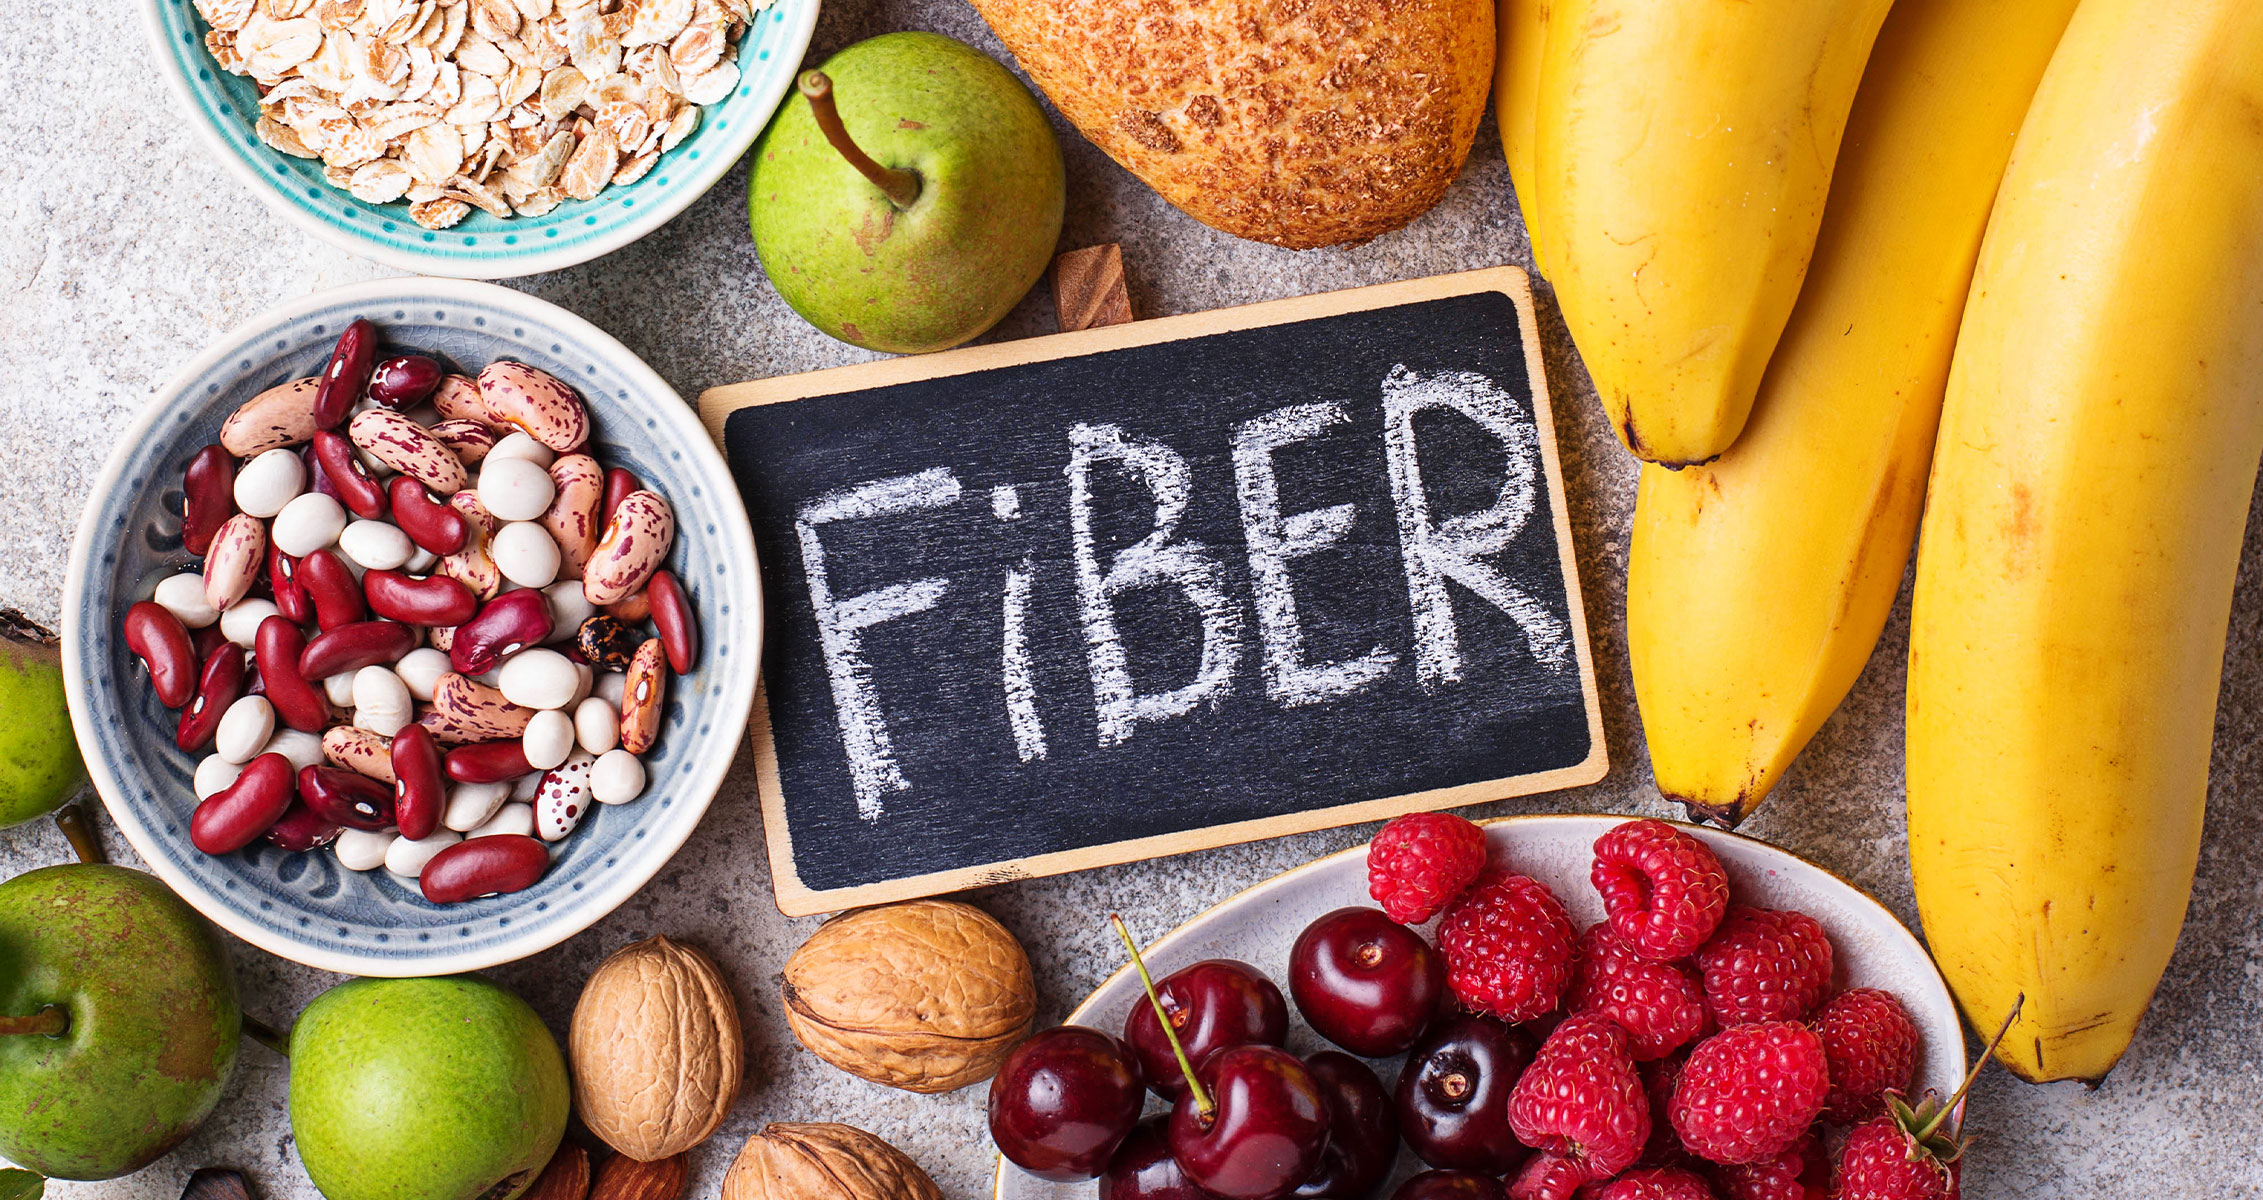 fiber foods for weight loss